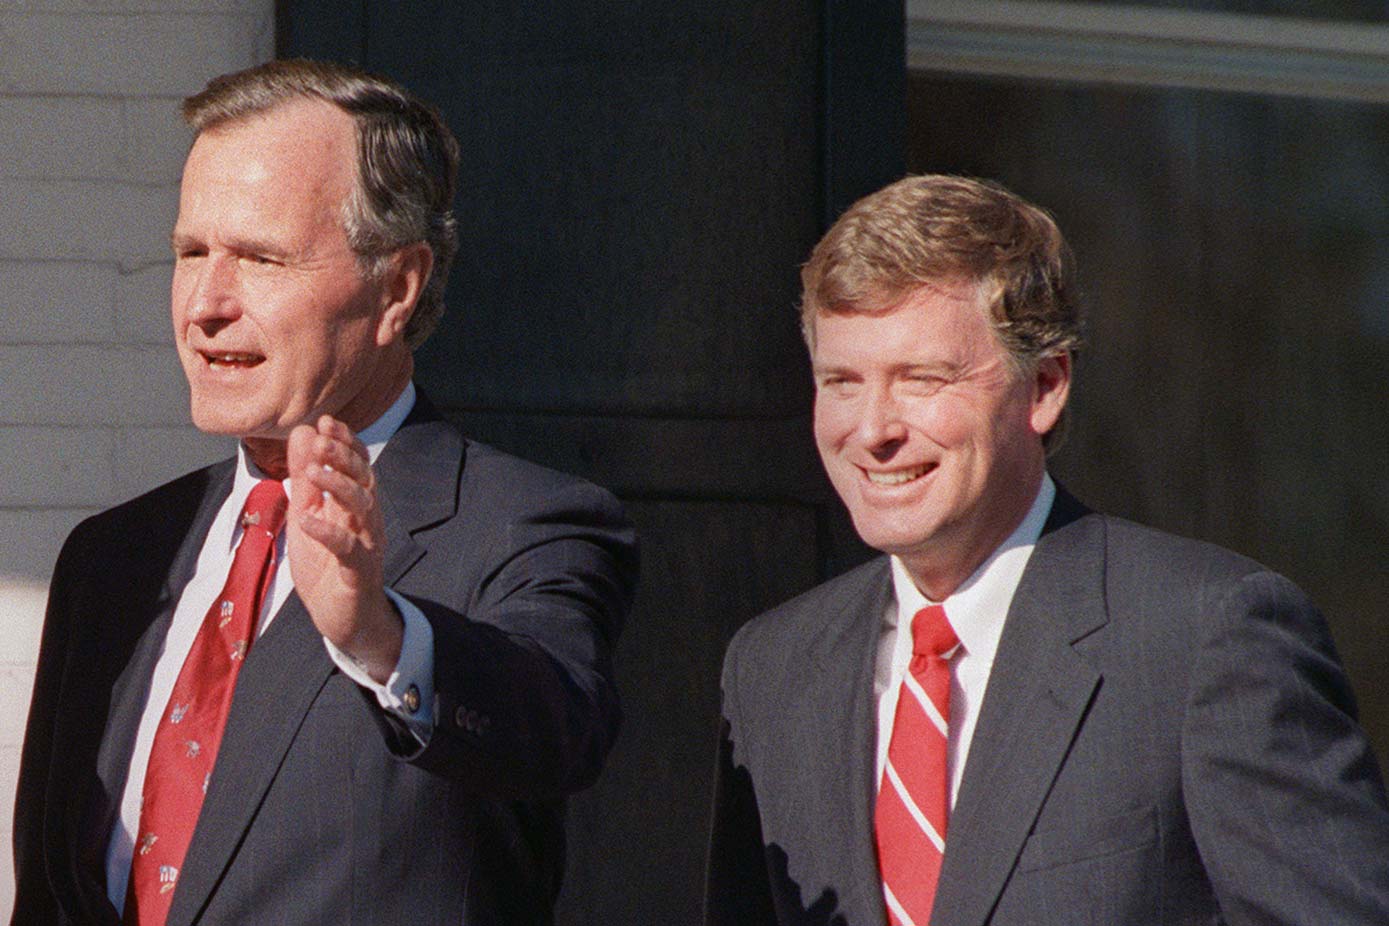 Historic photo of Bush and Quayle outside in Washington in the 80s.